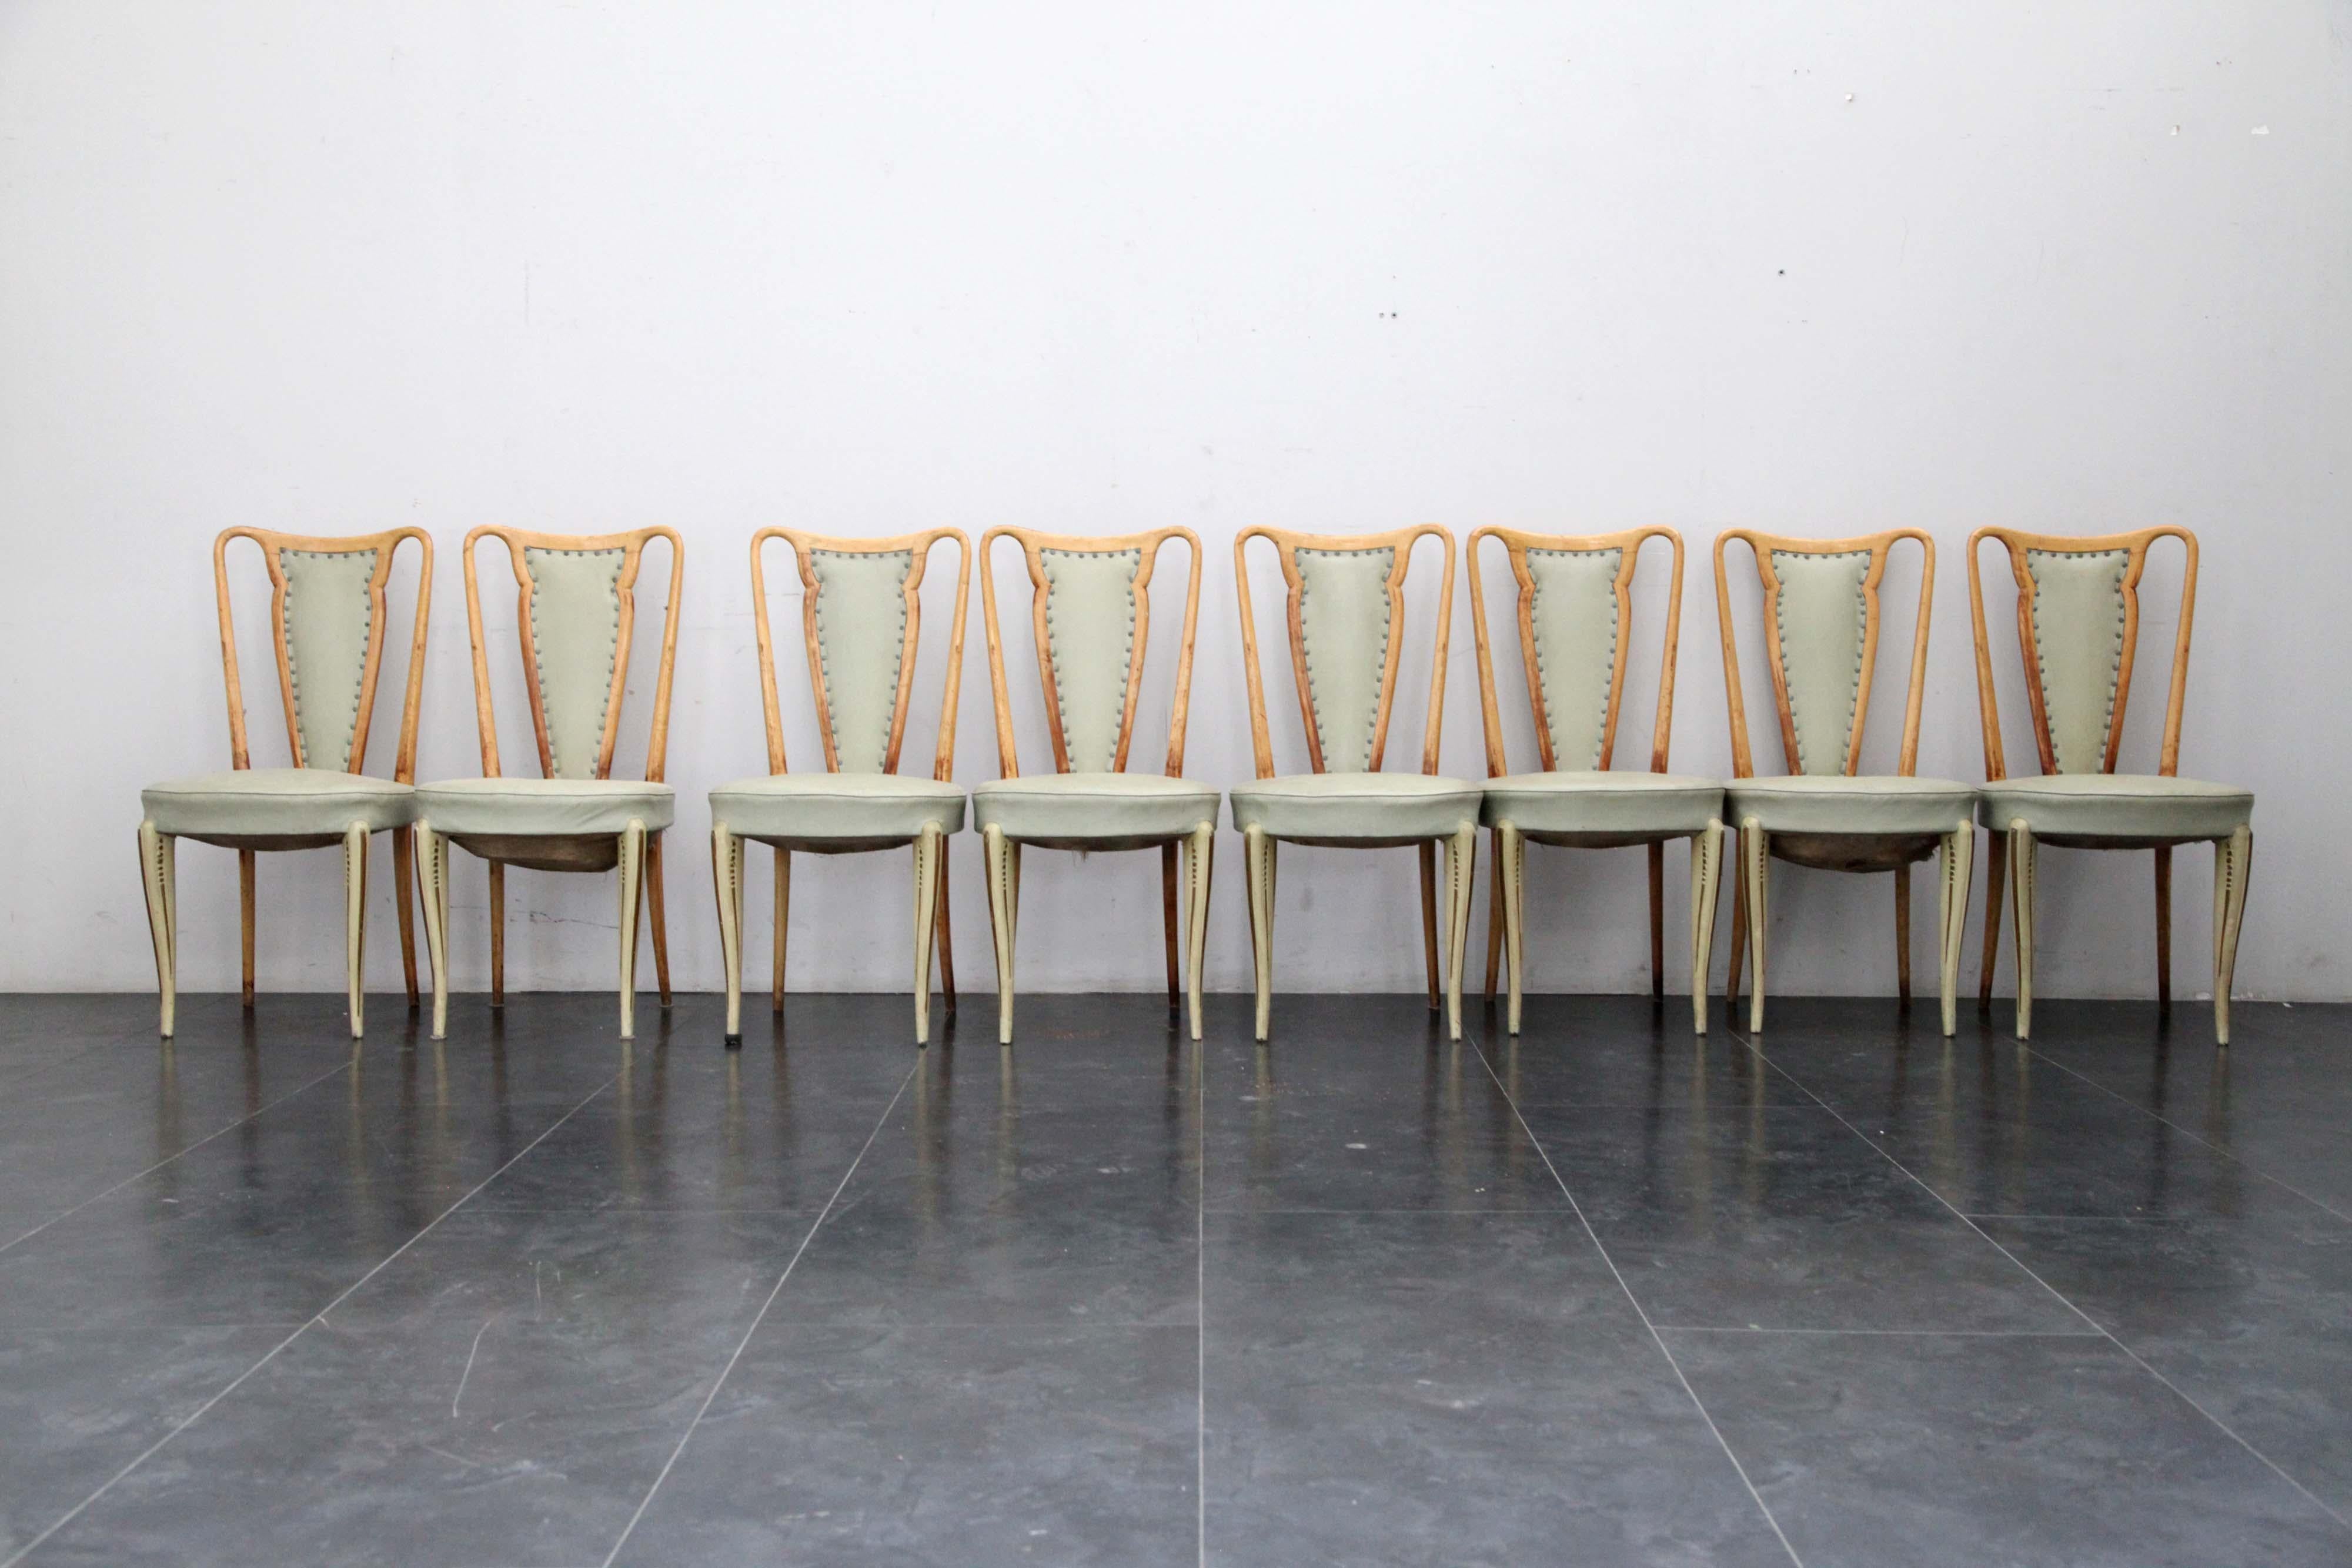 Maple chair with aquamarine green leather, for the Permanente Cantù, the design can be linked to Guglielmo Ulrich.
Set of 8 chairs.